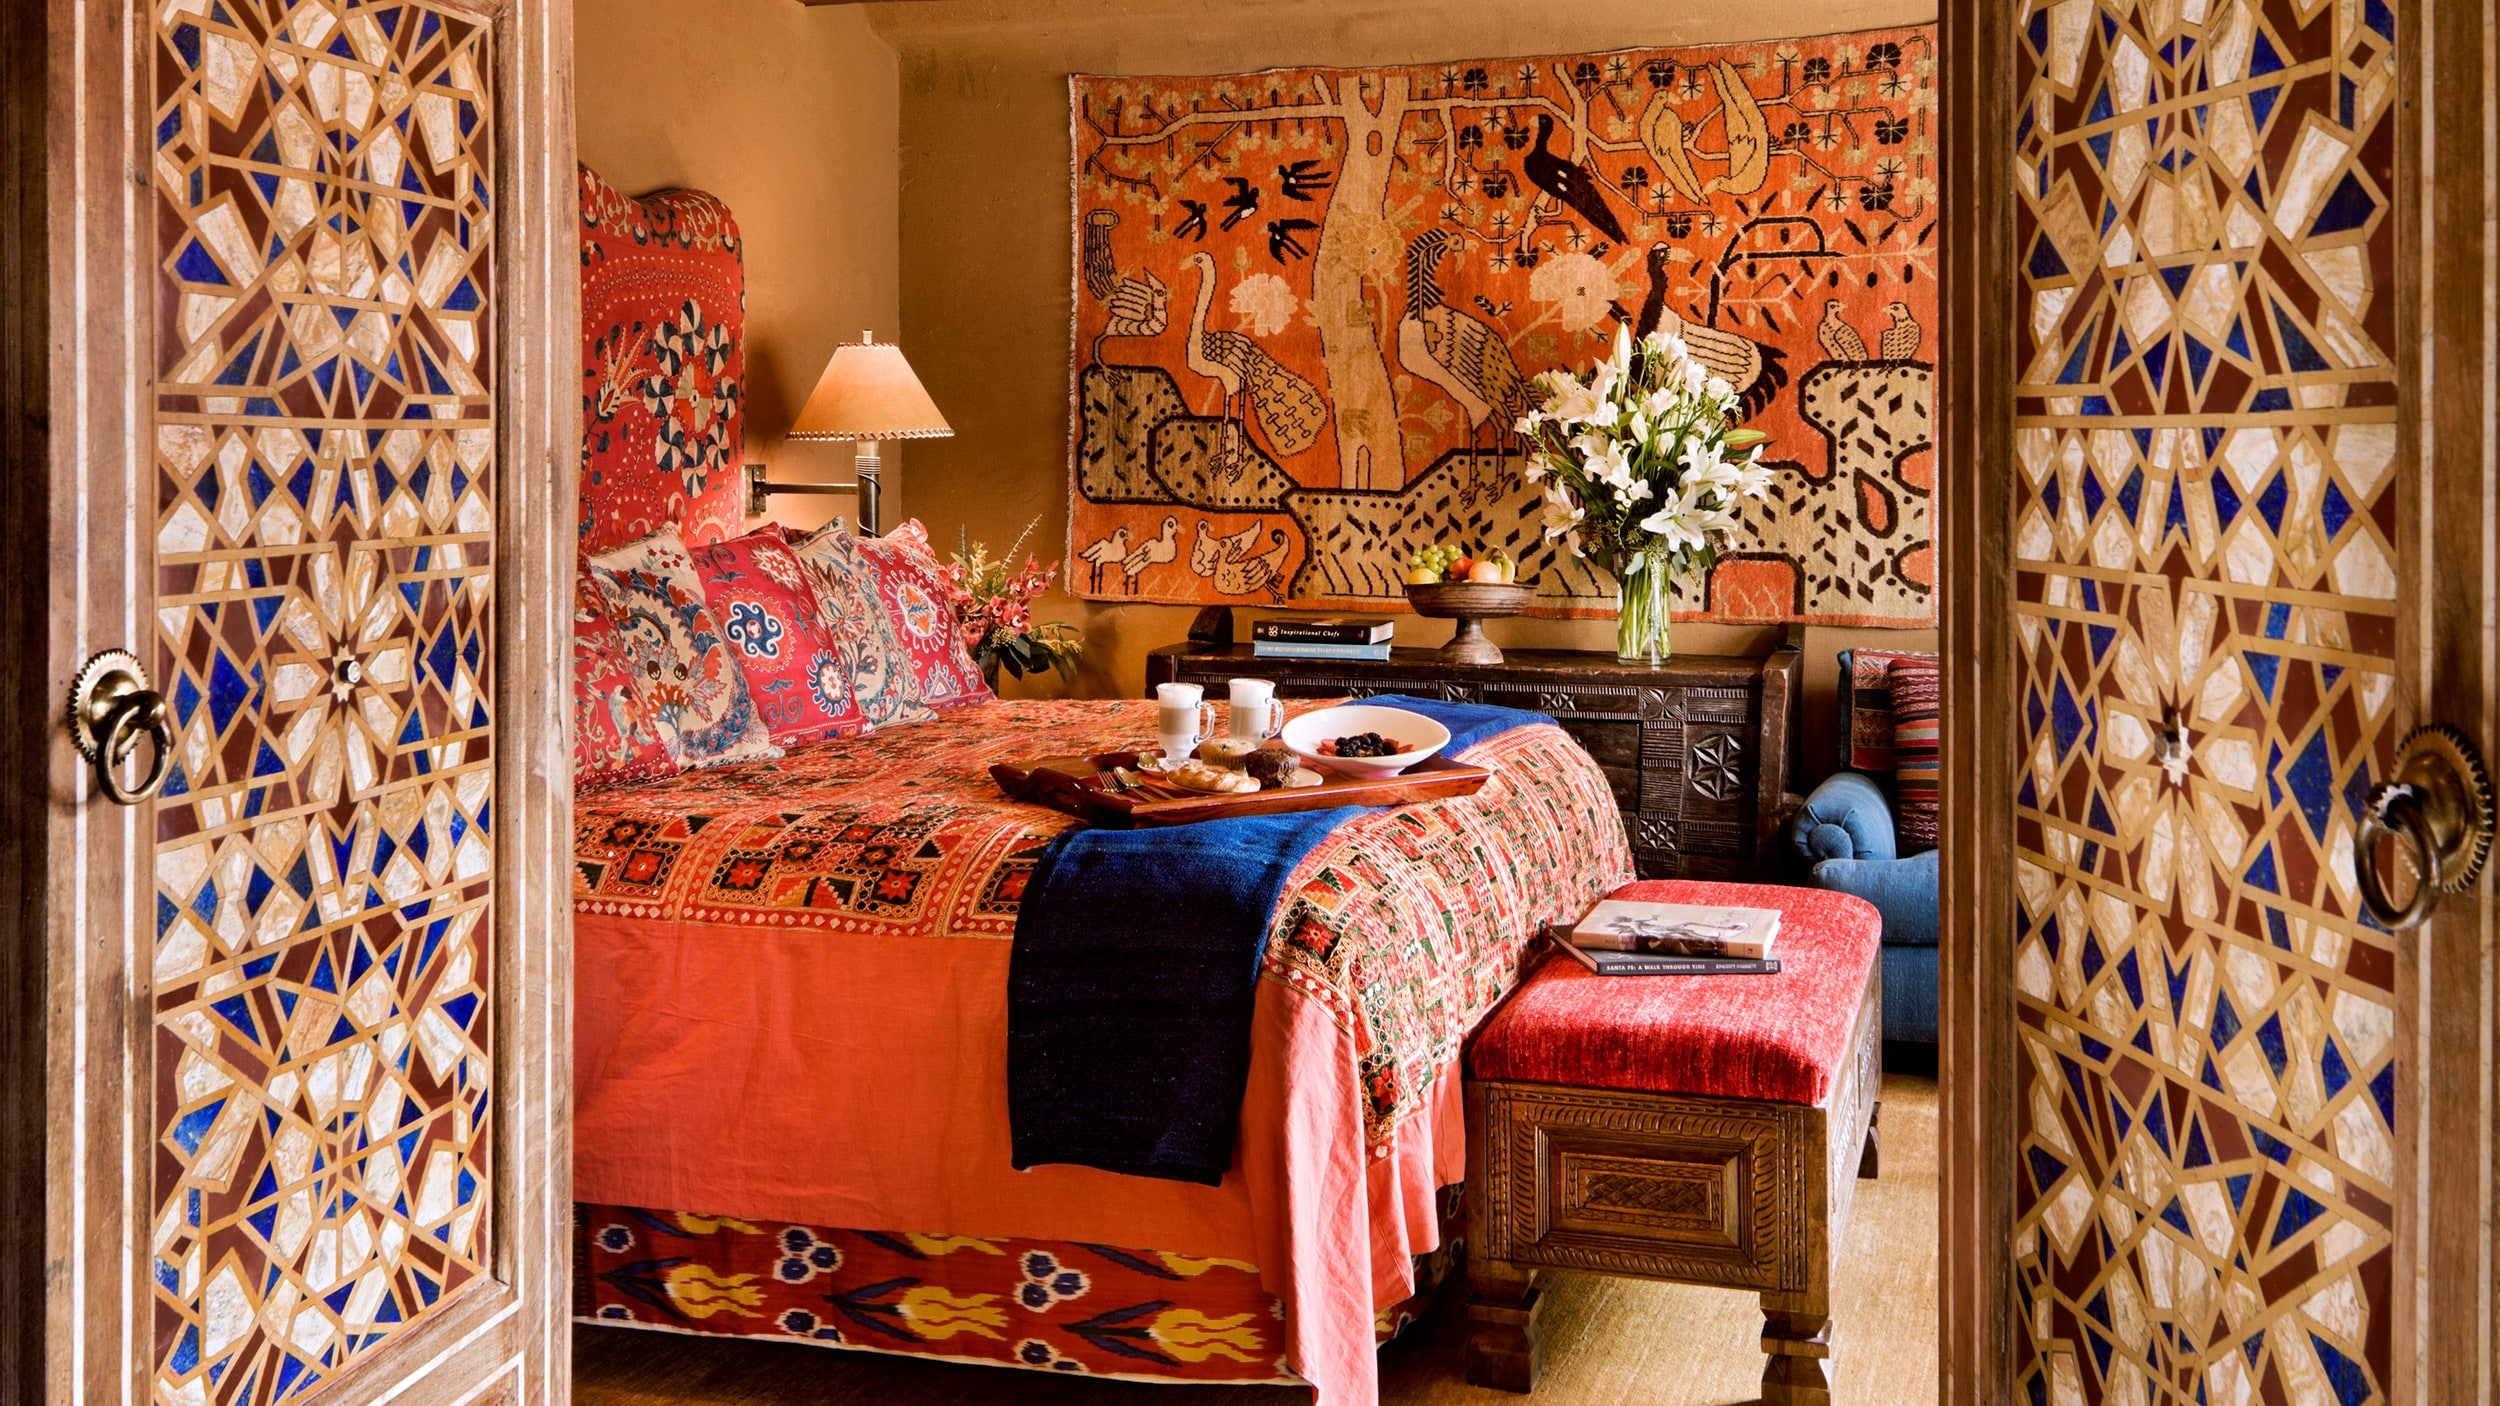 Introducing The Inn of The Five Graces, Where the Silk Road Meets Santa Fe